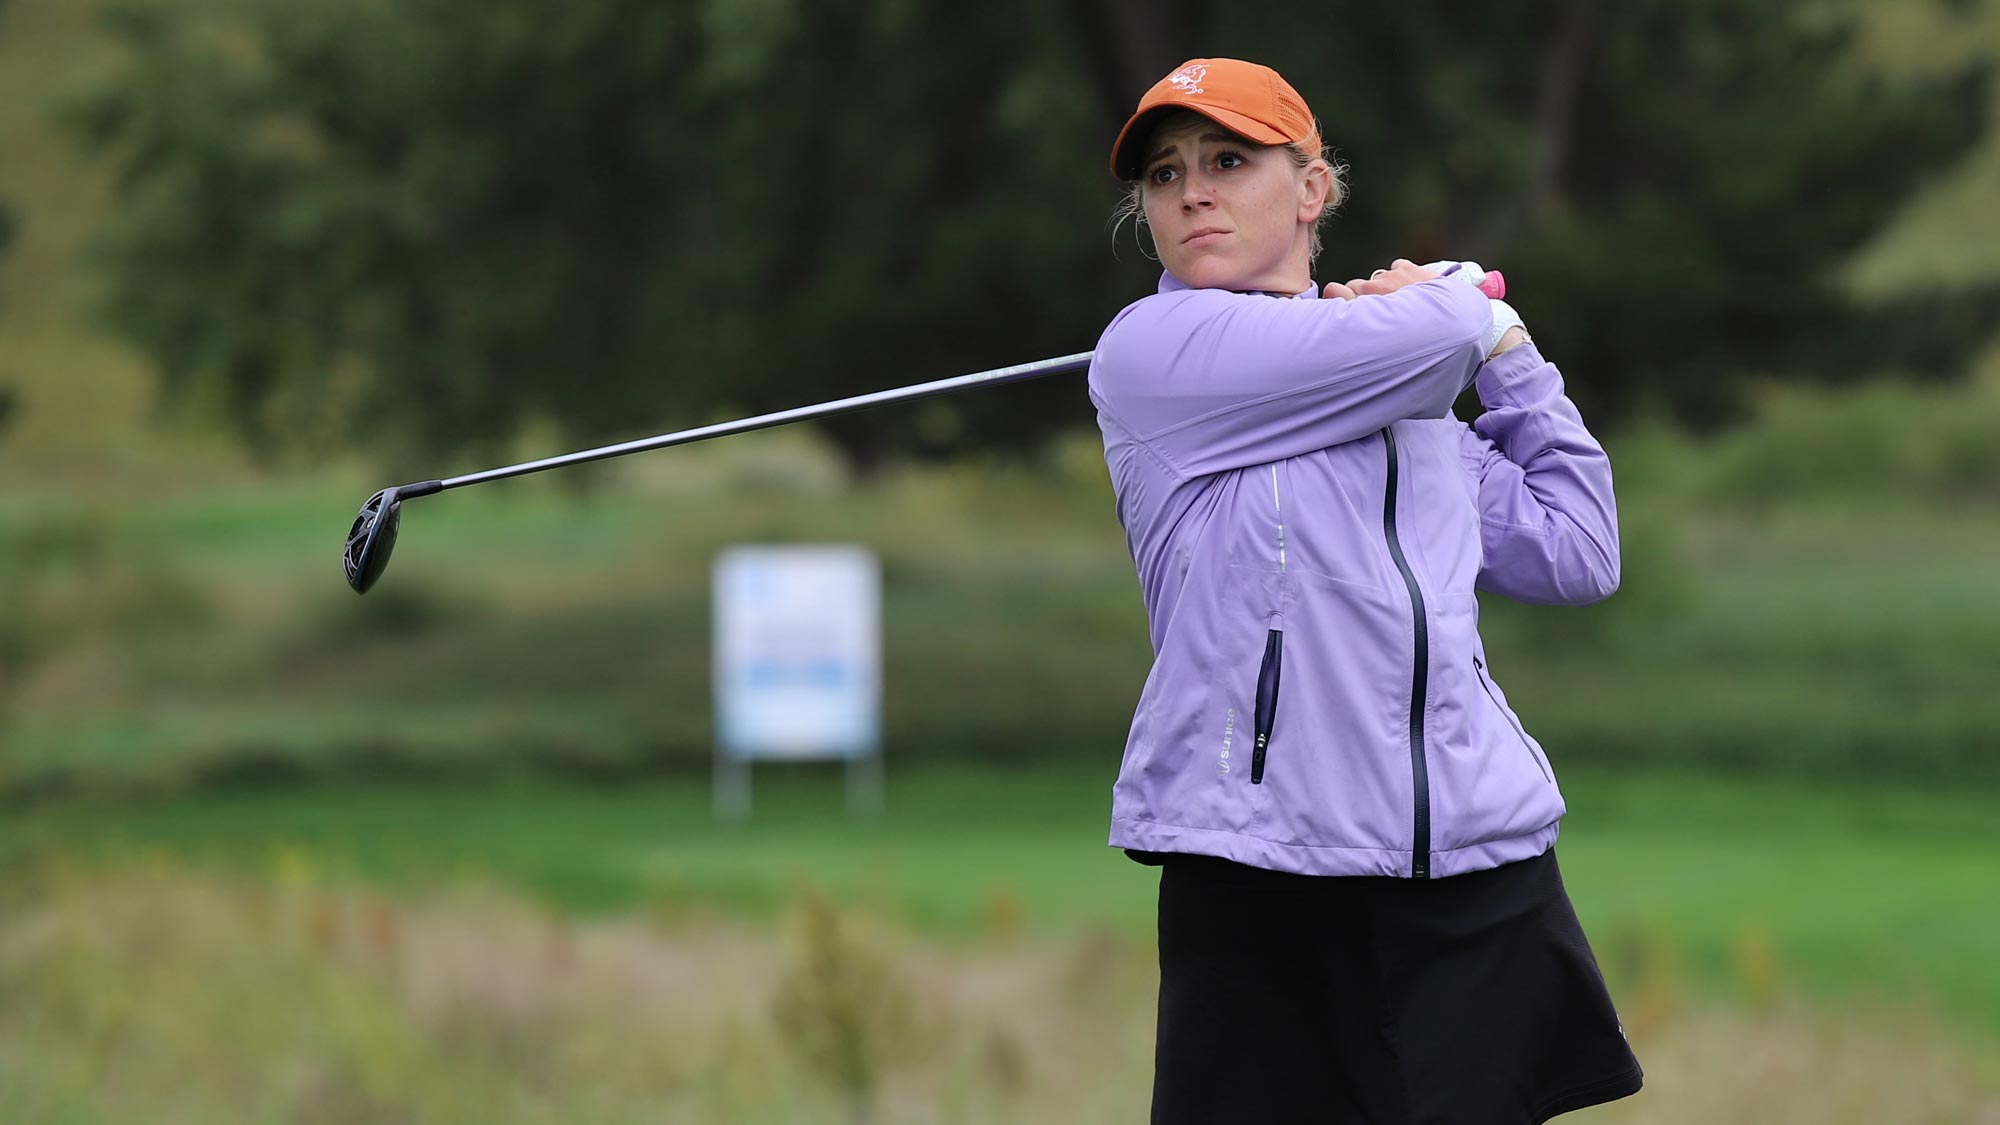 Madison Pressel during the second round of the Garden City Charity Classic